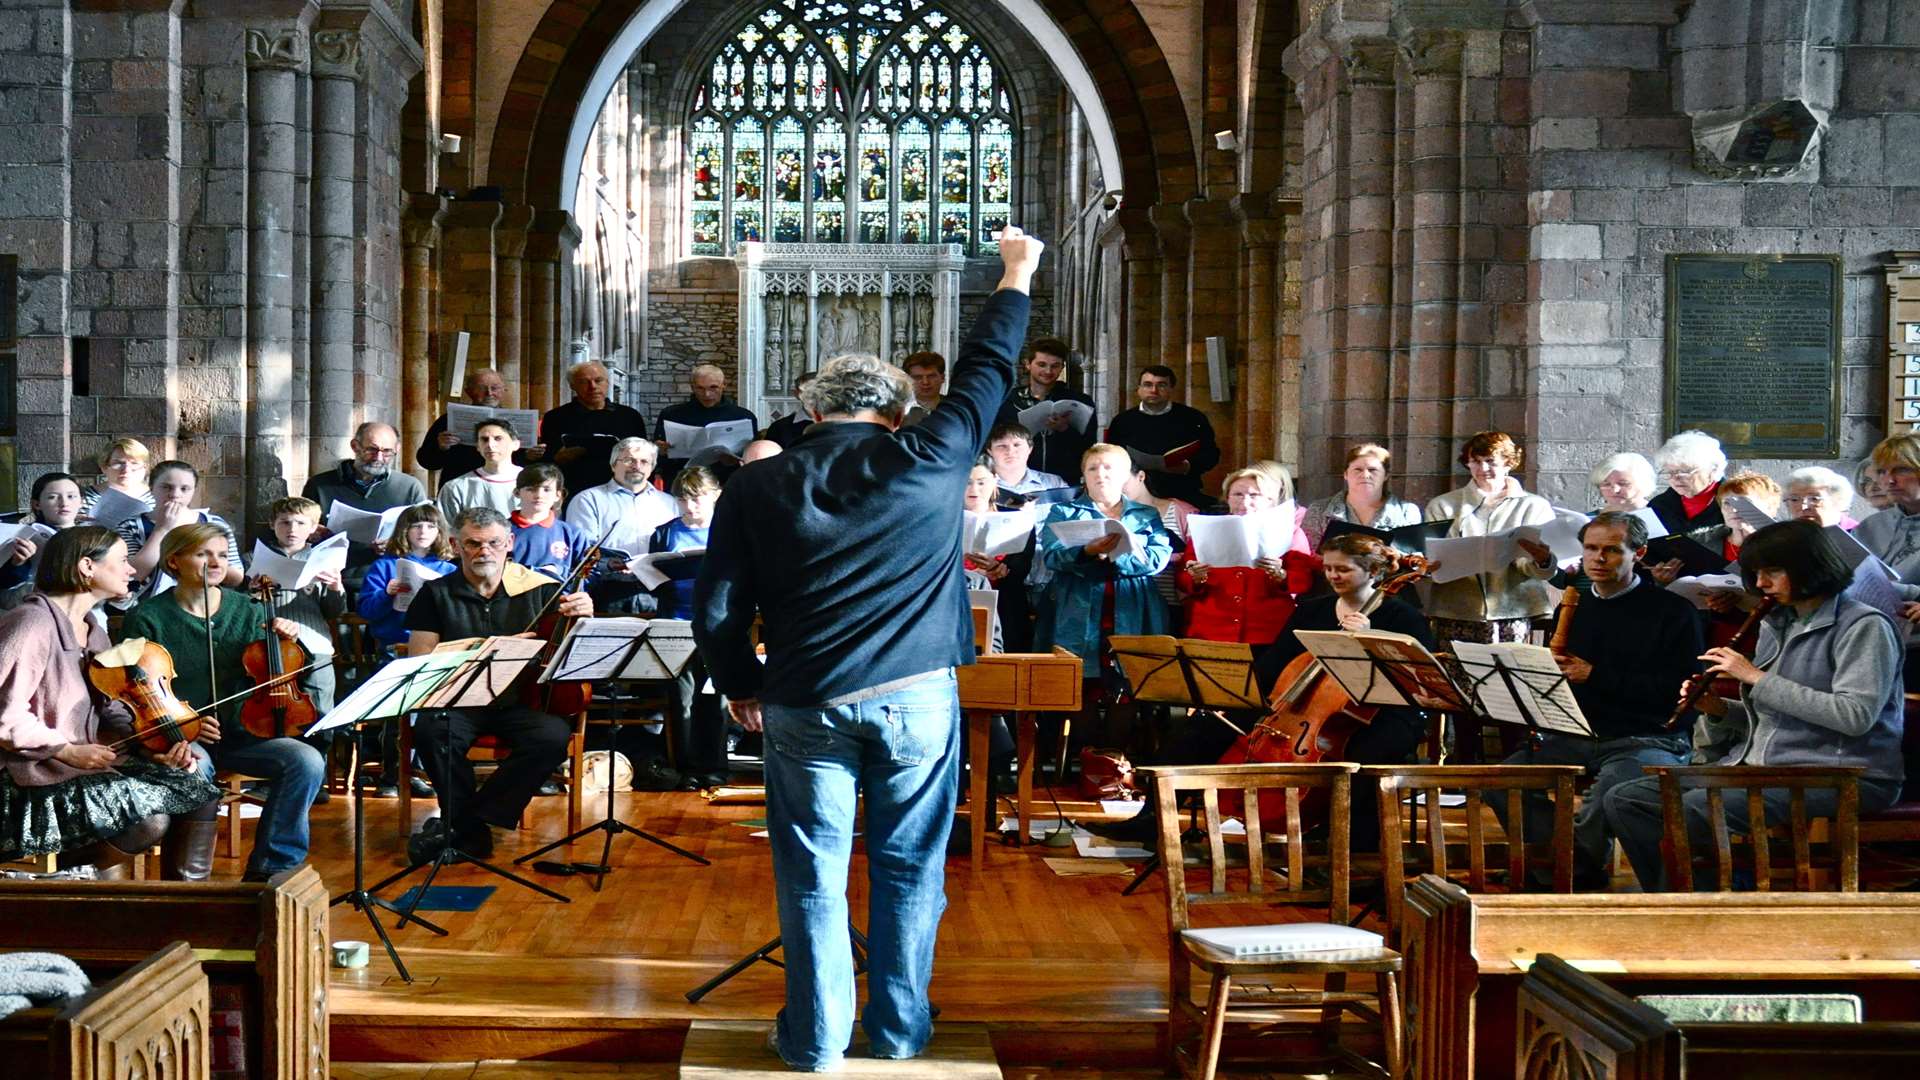 For the tour, ETO has joined forces with local cathedral, community and gospel choirs around the country